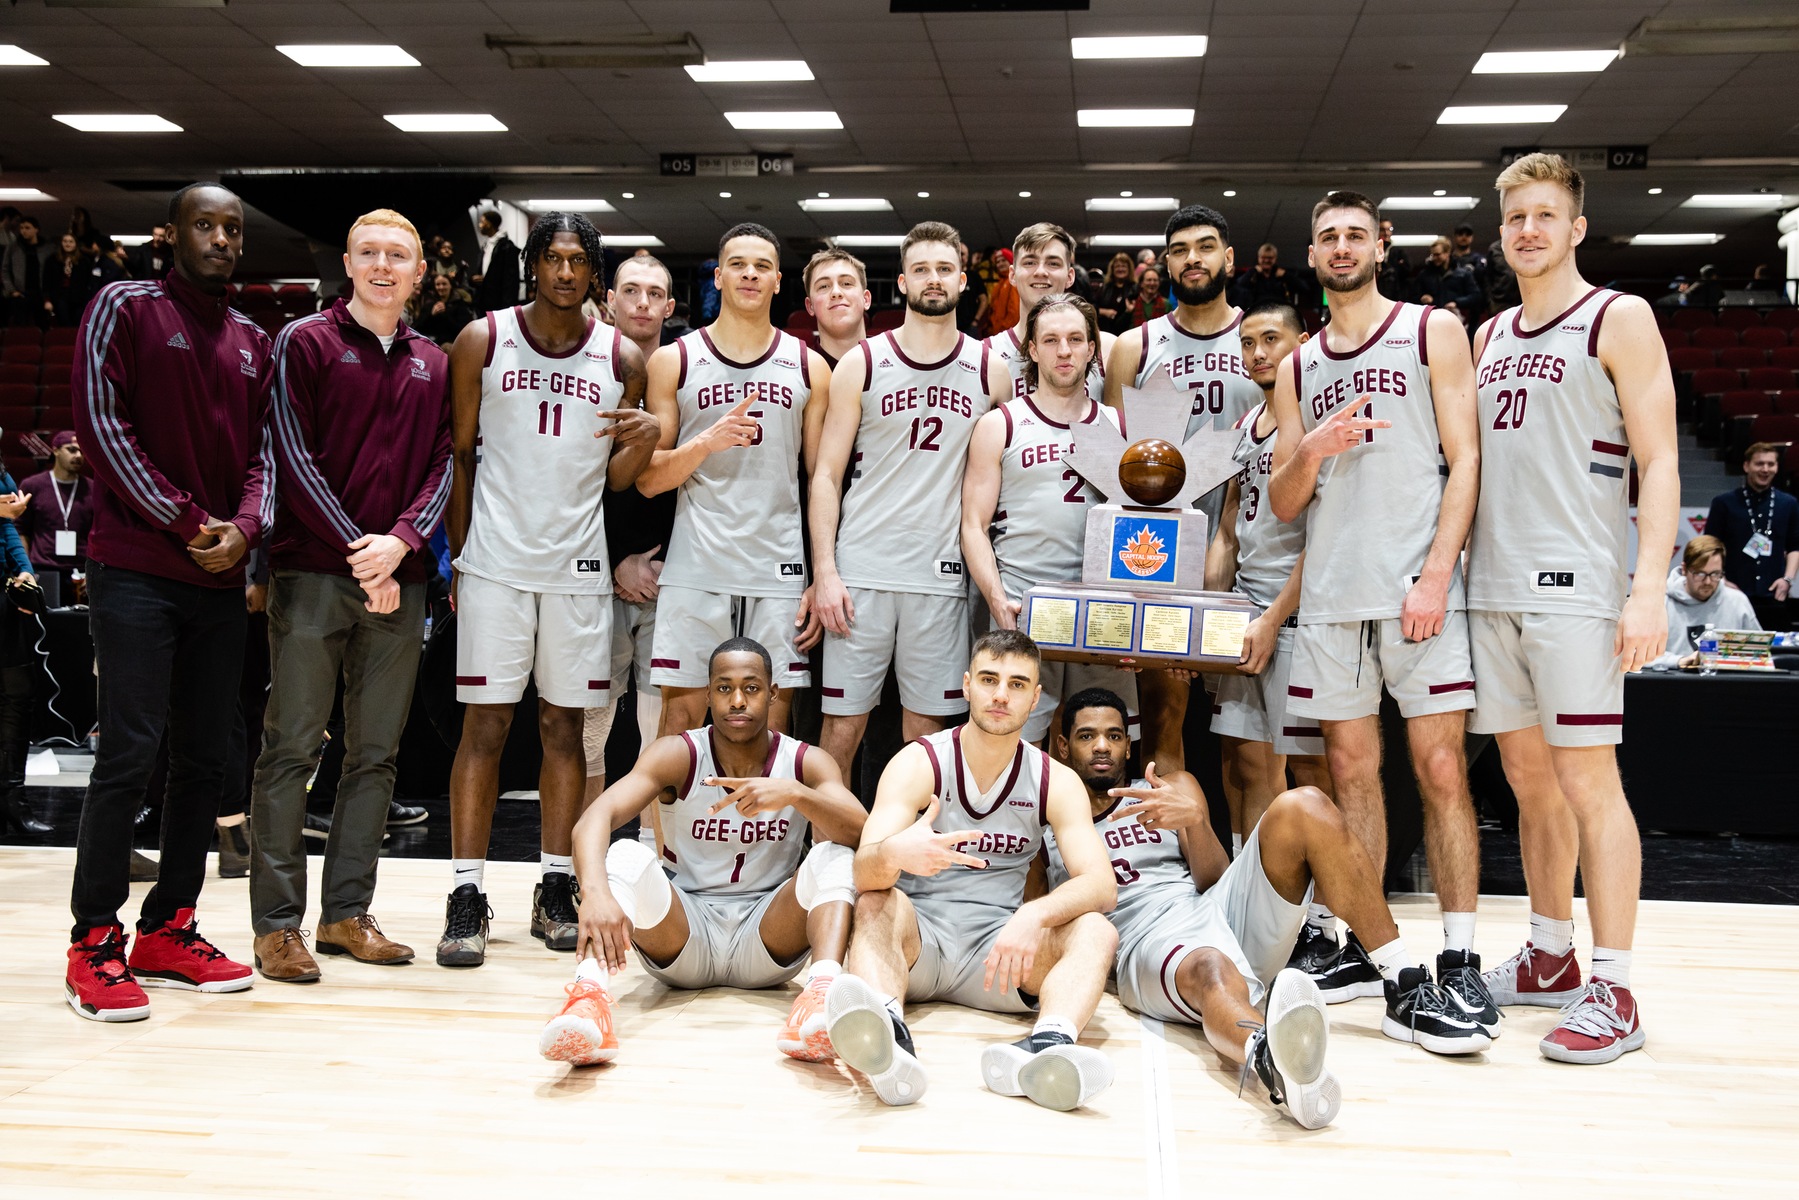 Gee-Gees men's team with the event trophy.